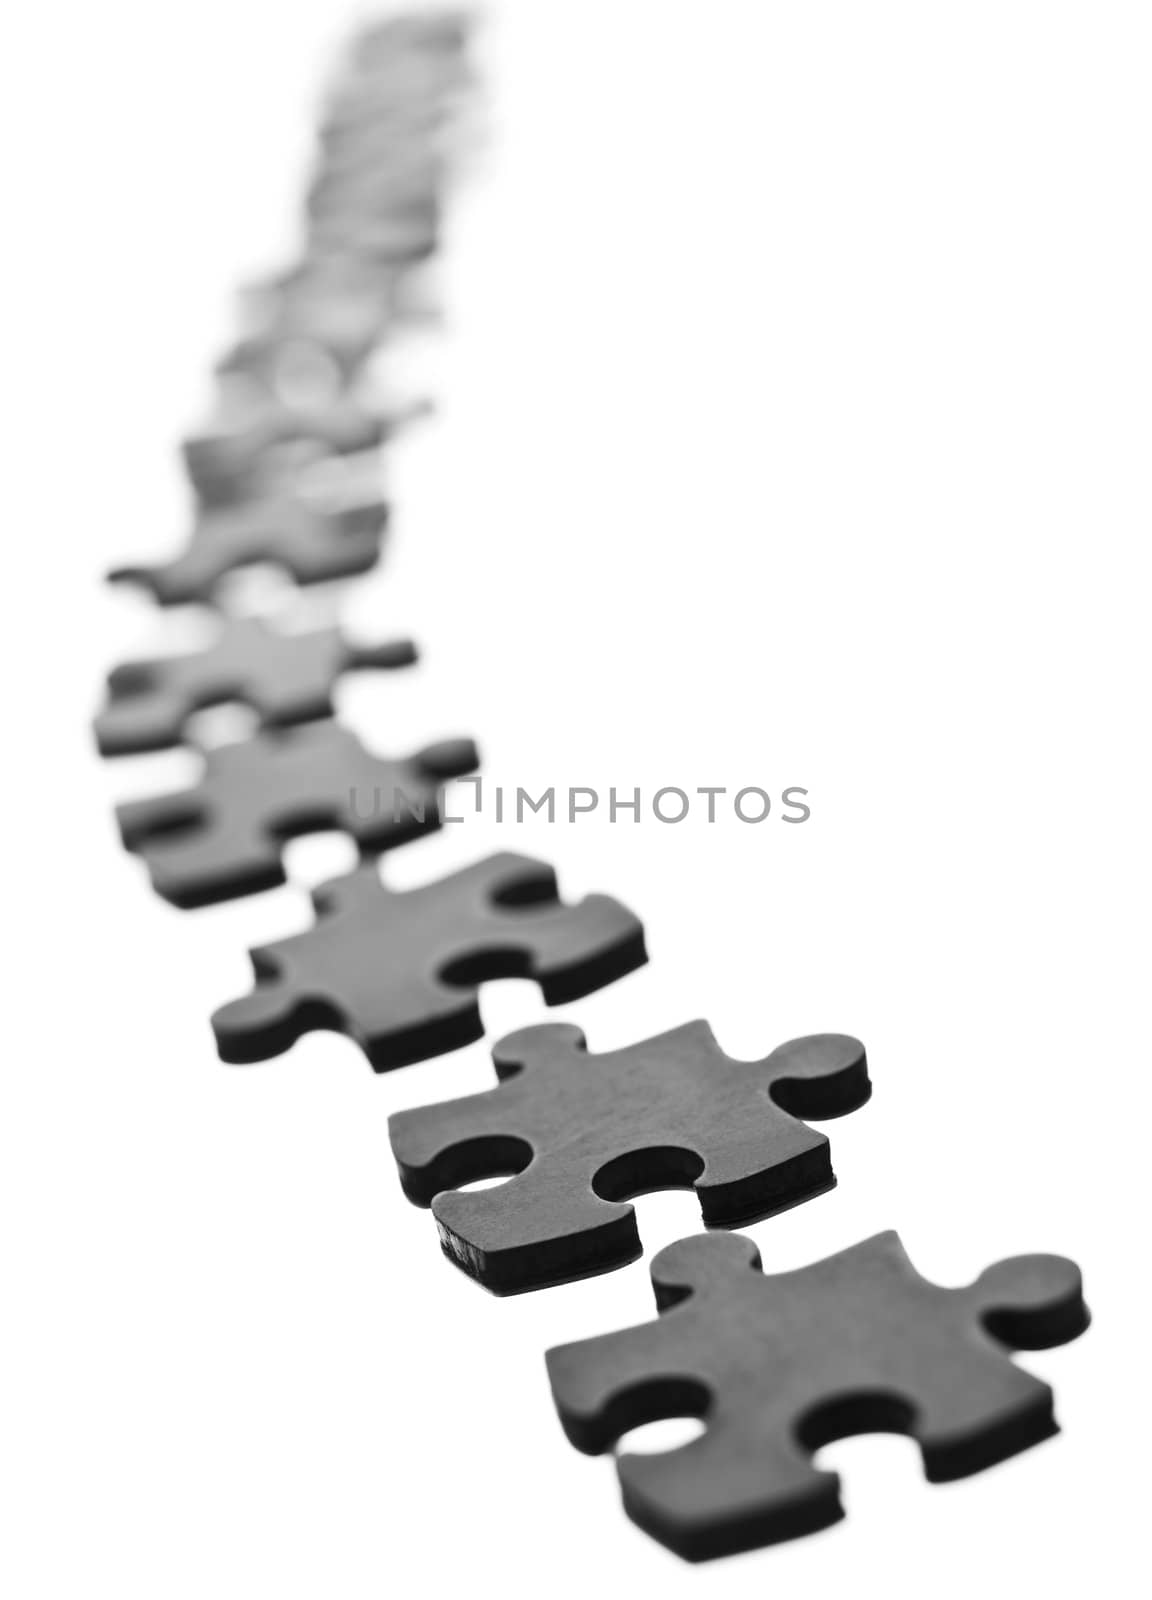 Black Jigsaw pieces in a row isolated on white